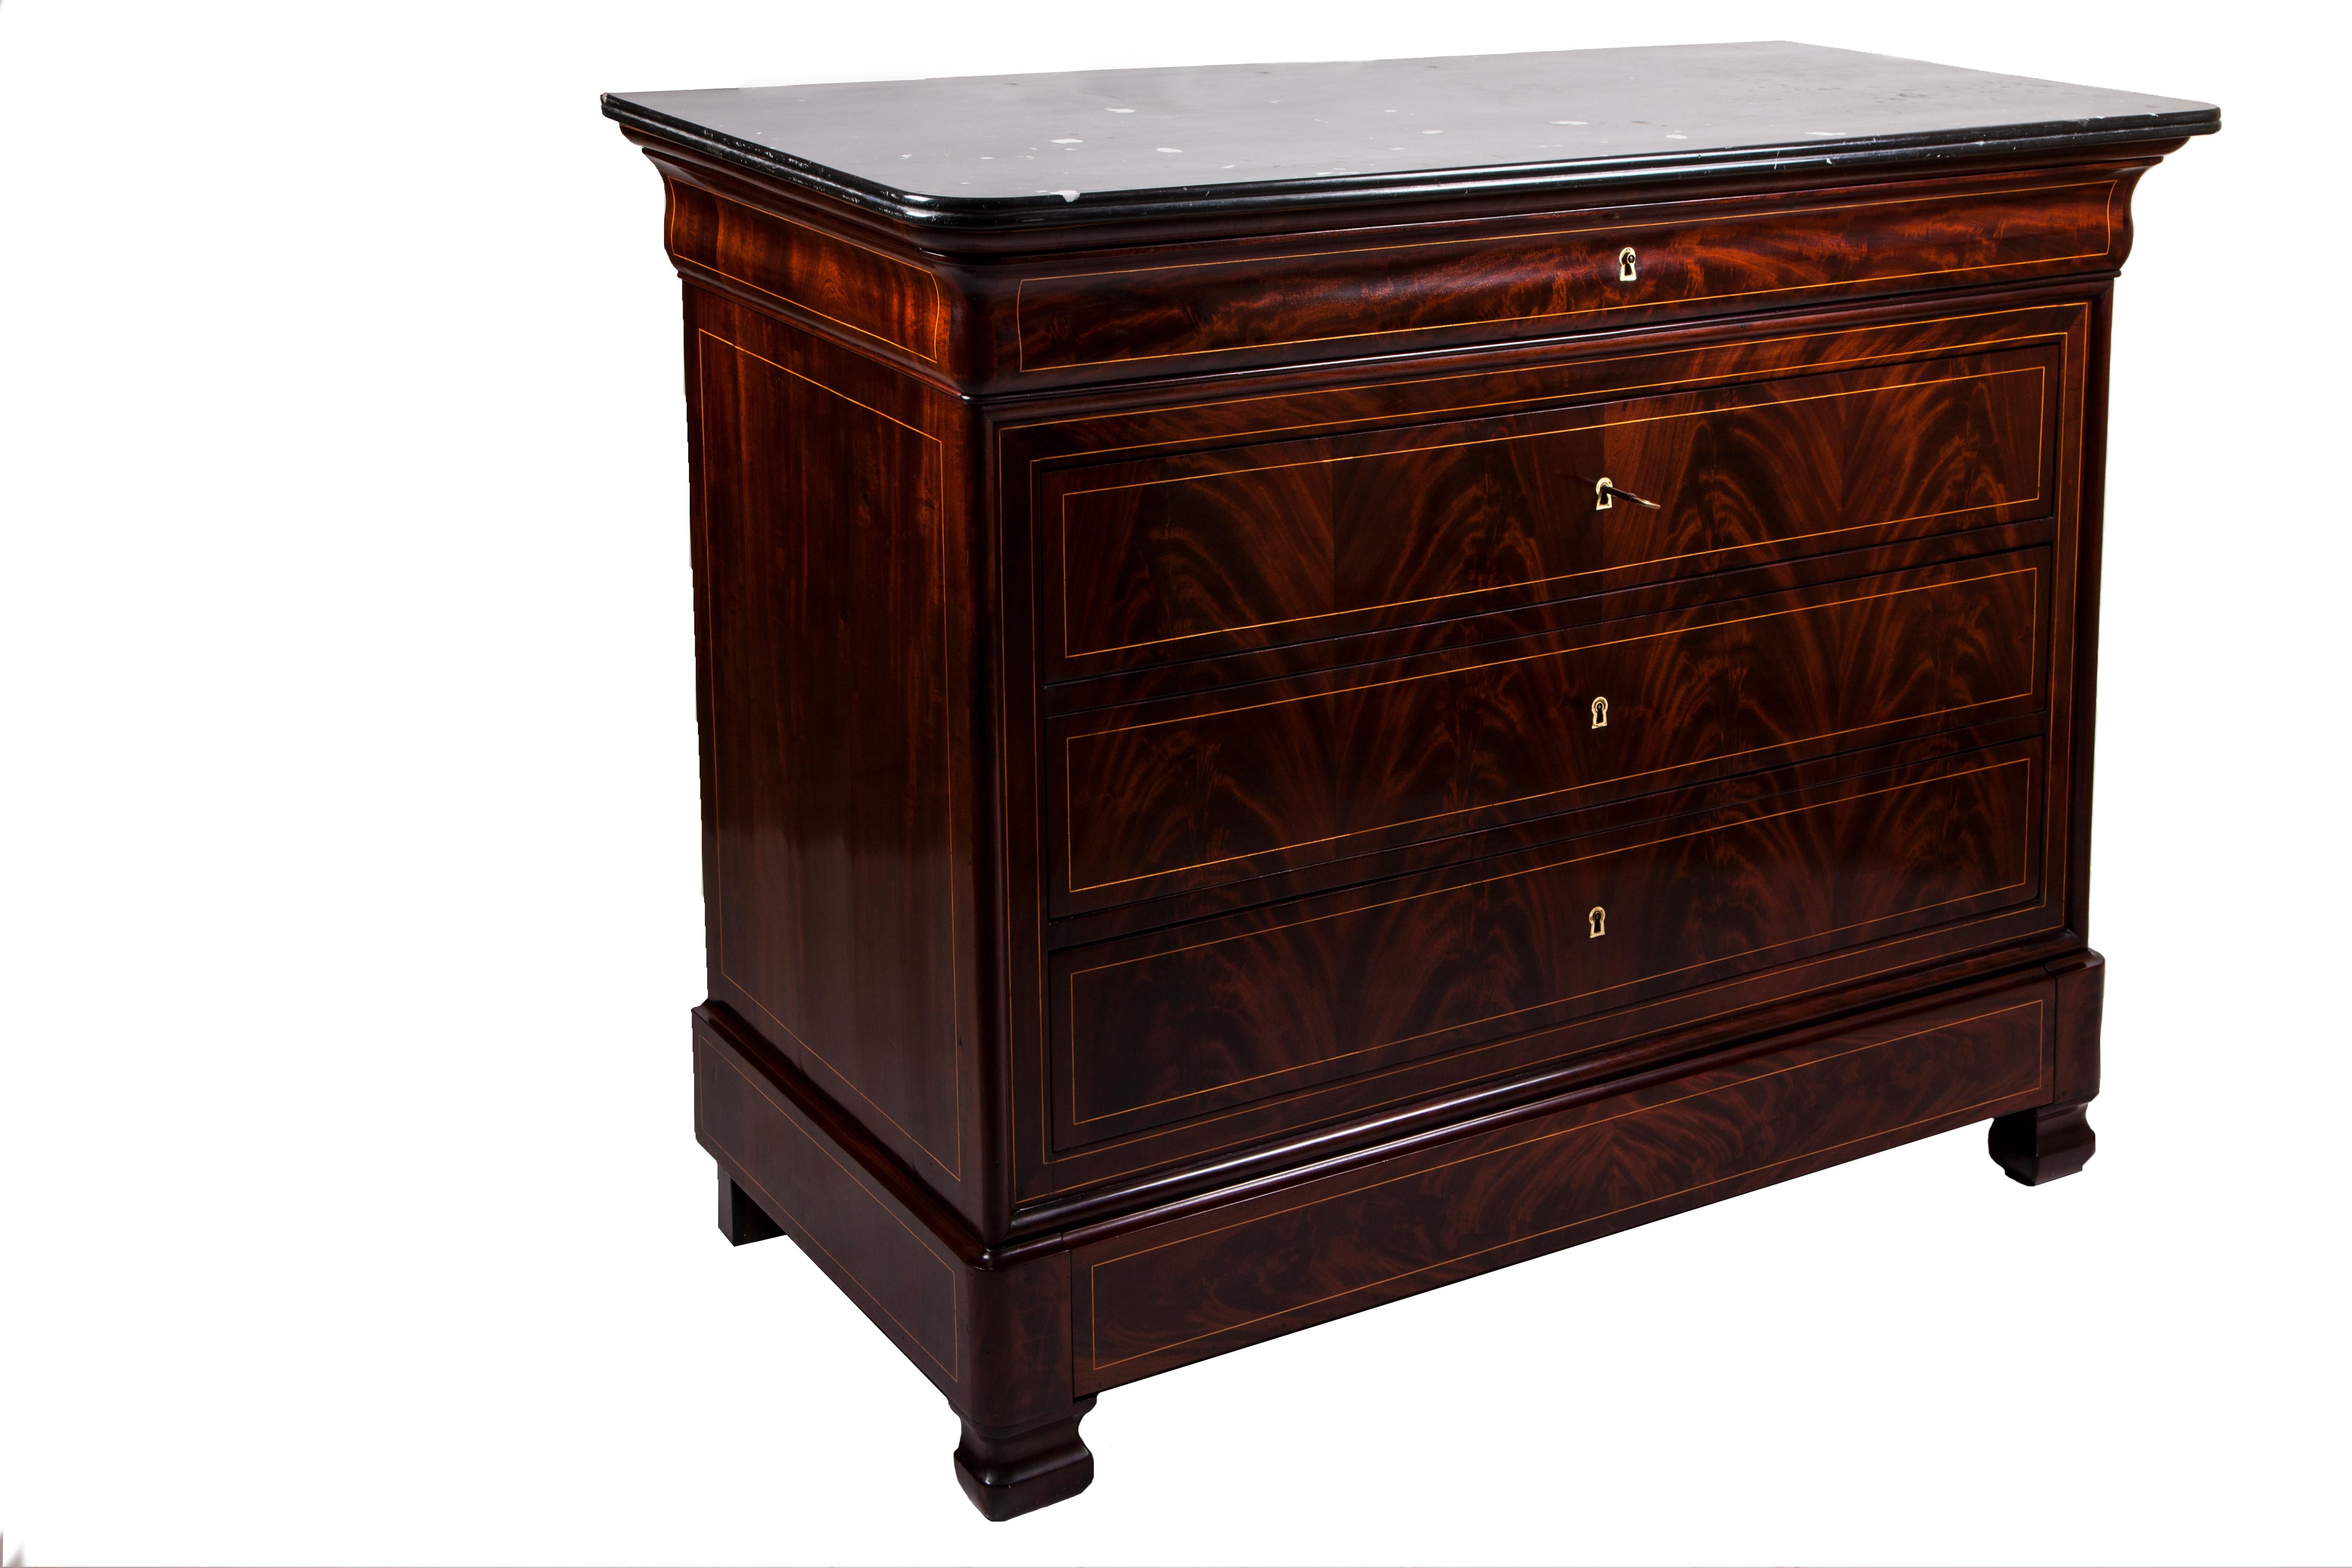 Elegant French Charles X style chest of drawers, in flamed mahogany and maple.
On the top, there is a beautiful veined black marble. 
The desk has the original leather and a series of small maple drawers.